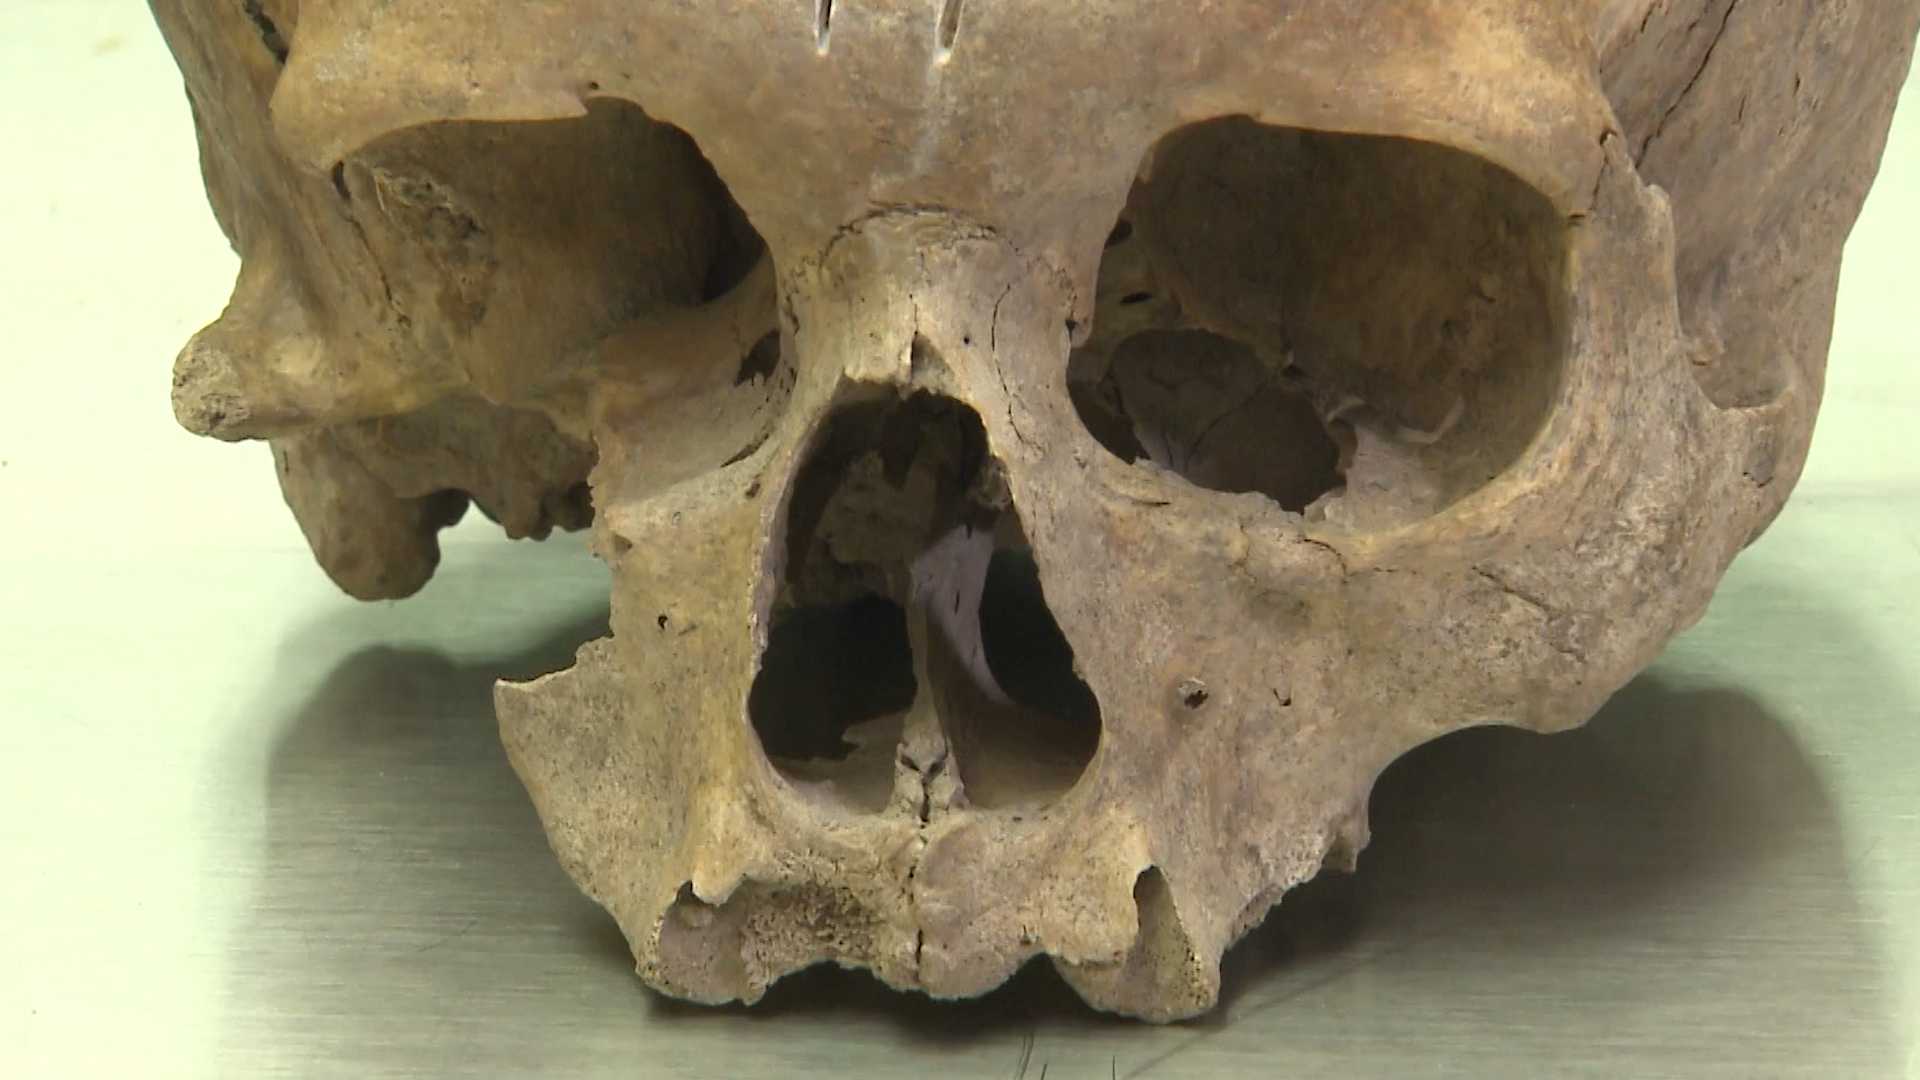 Human skull discovery still stumps forensic investigators one year later